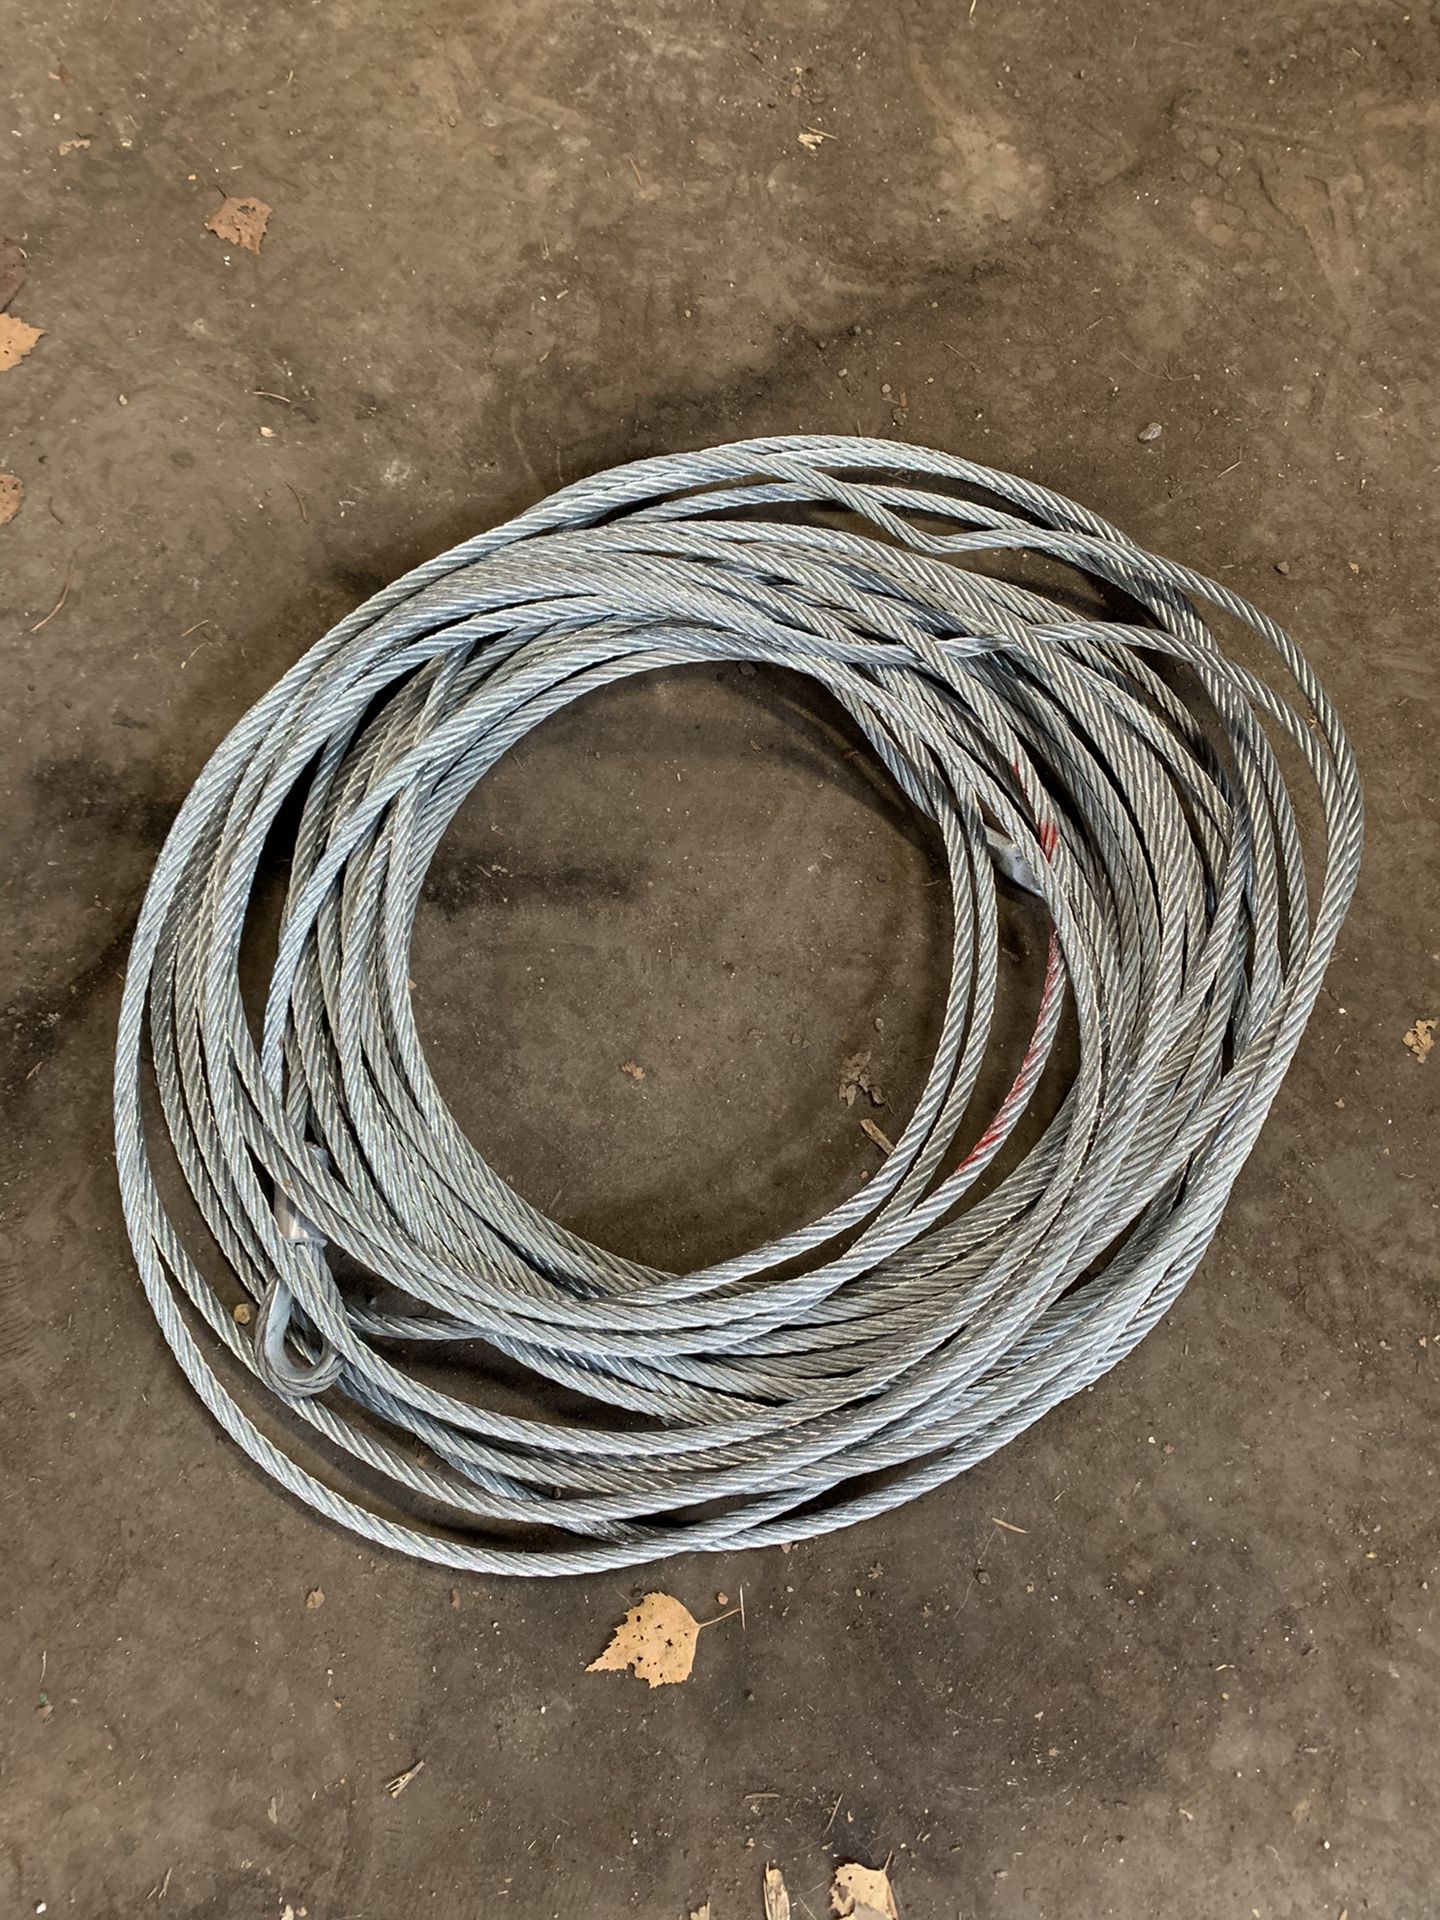 New 9,000lb steel winch cable